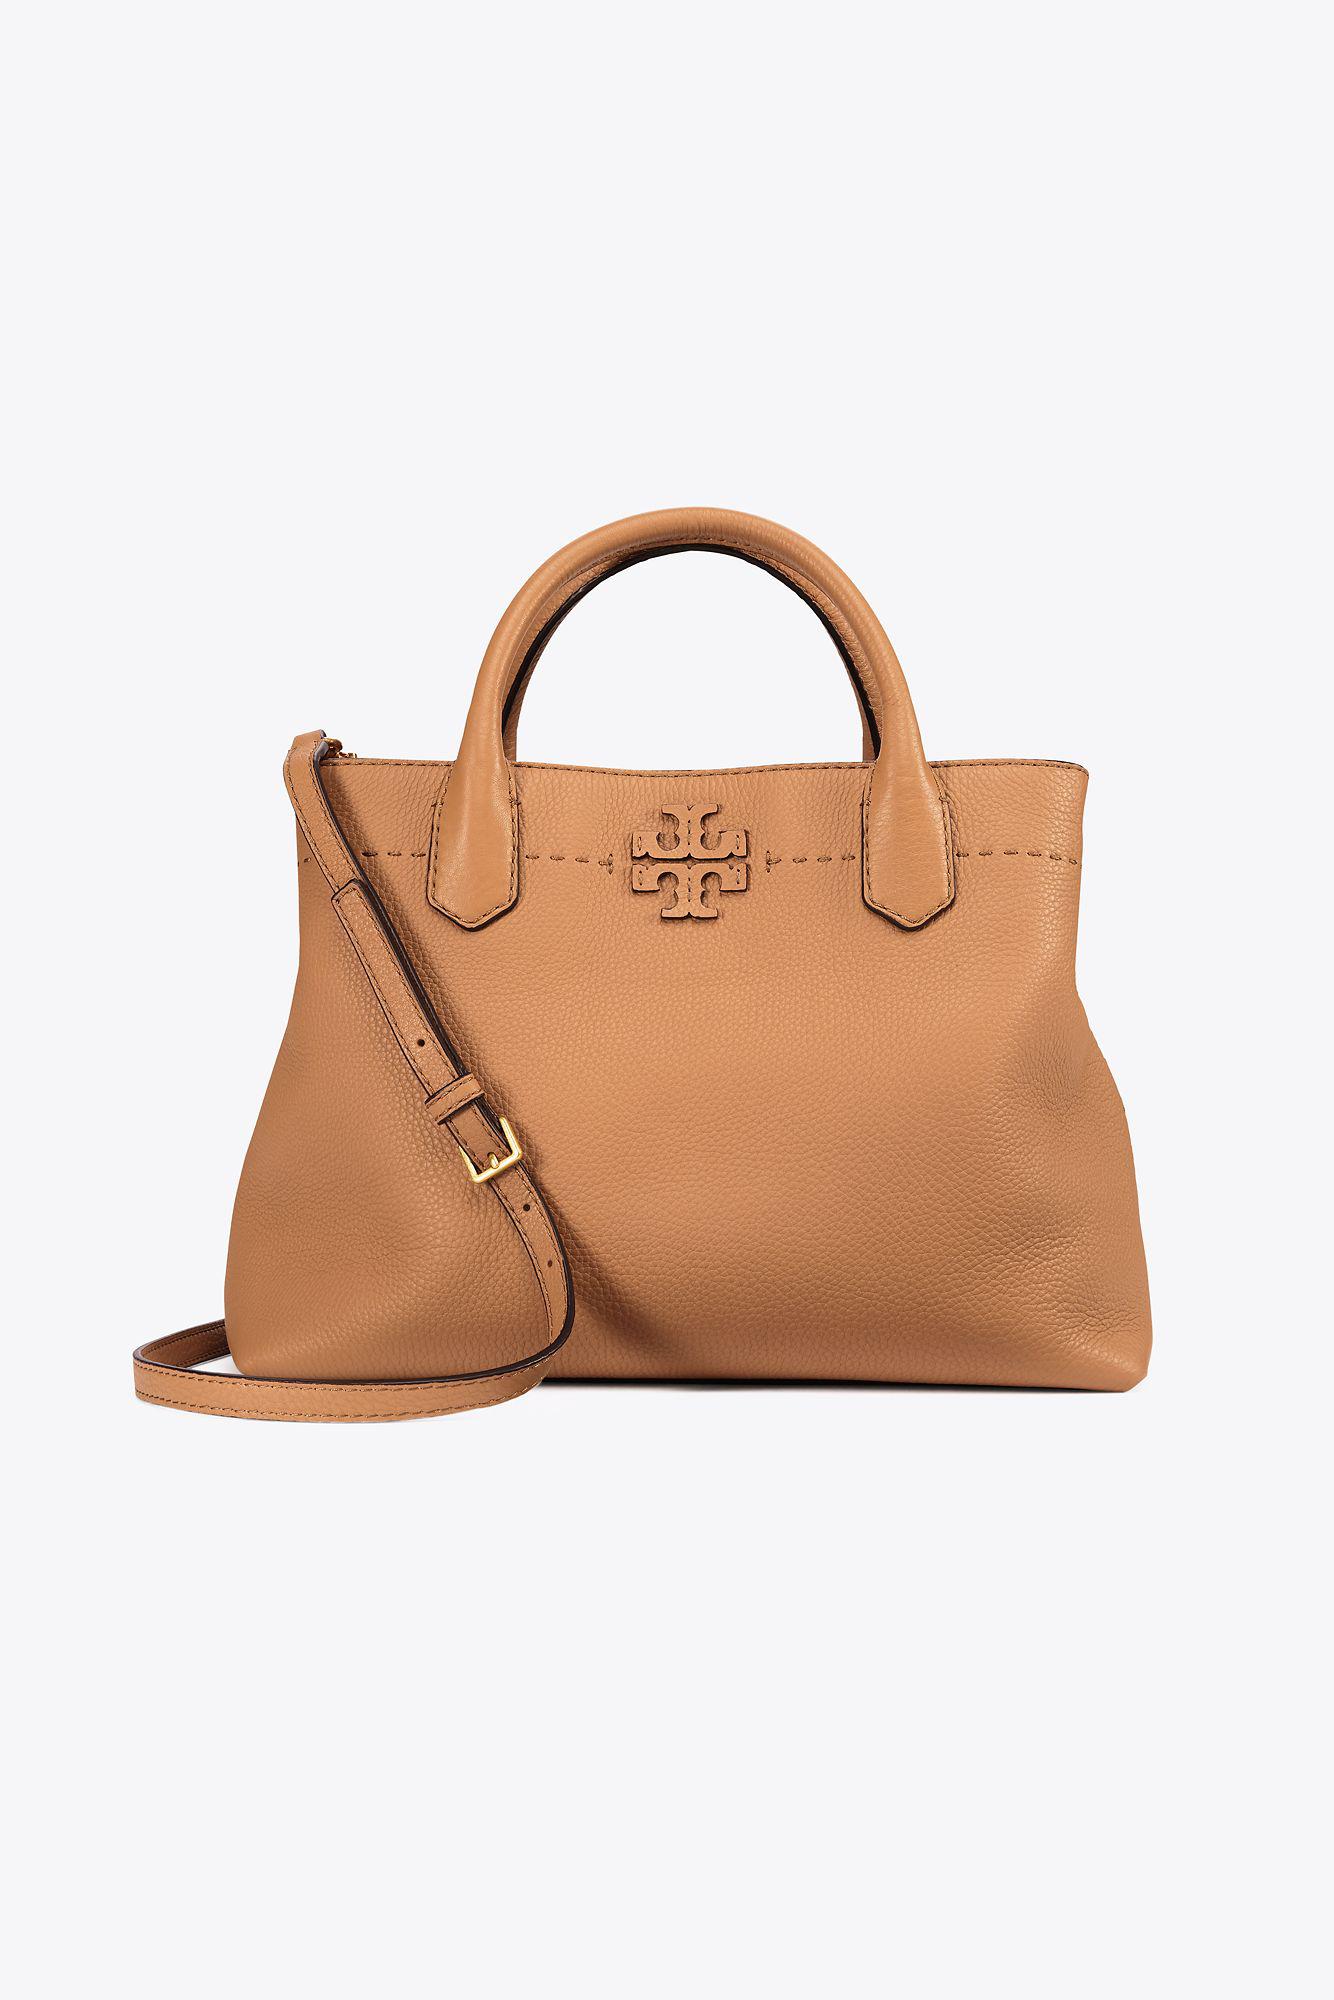 Tory Burch Leather Mcgraw Triple-compartment Tote in Brown | Lyst